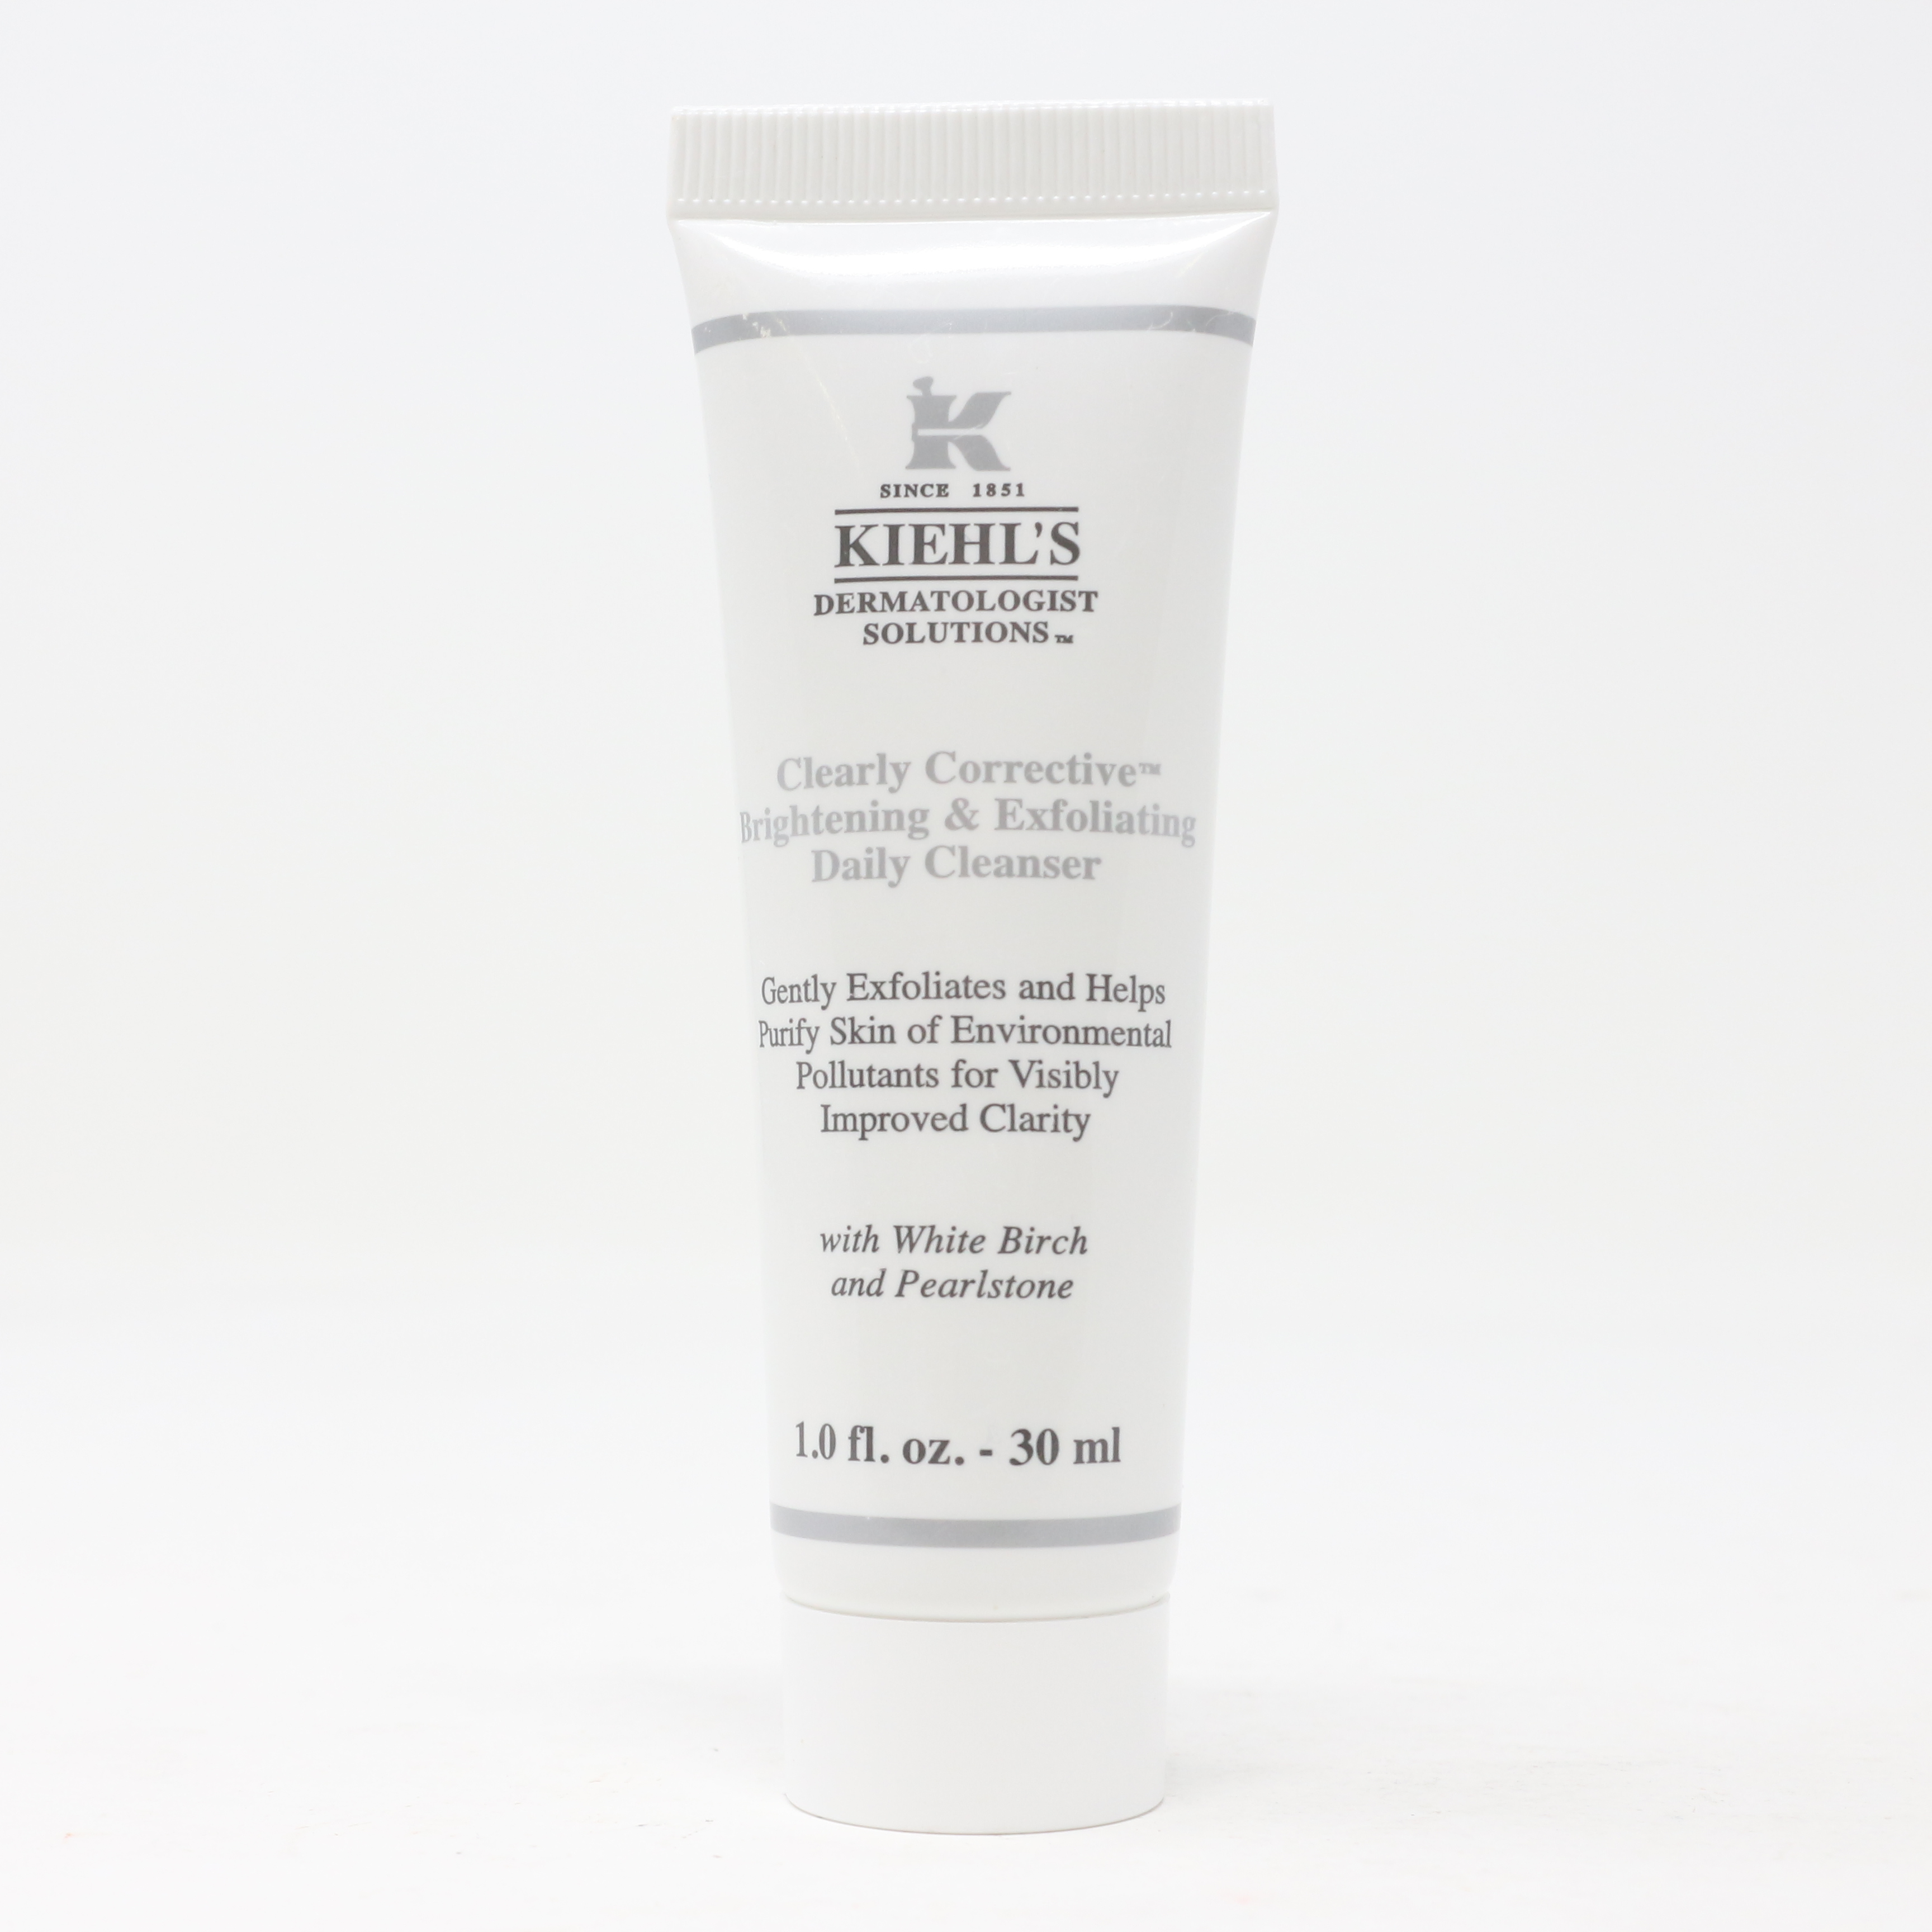 Kiehl's Clearly Corrective Daily Brightening And Exfoliating Cleanser 1oz/30ml - image 1 of 1